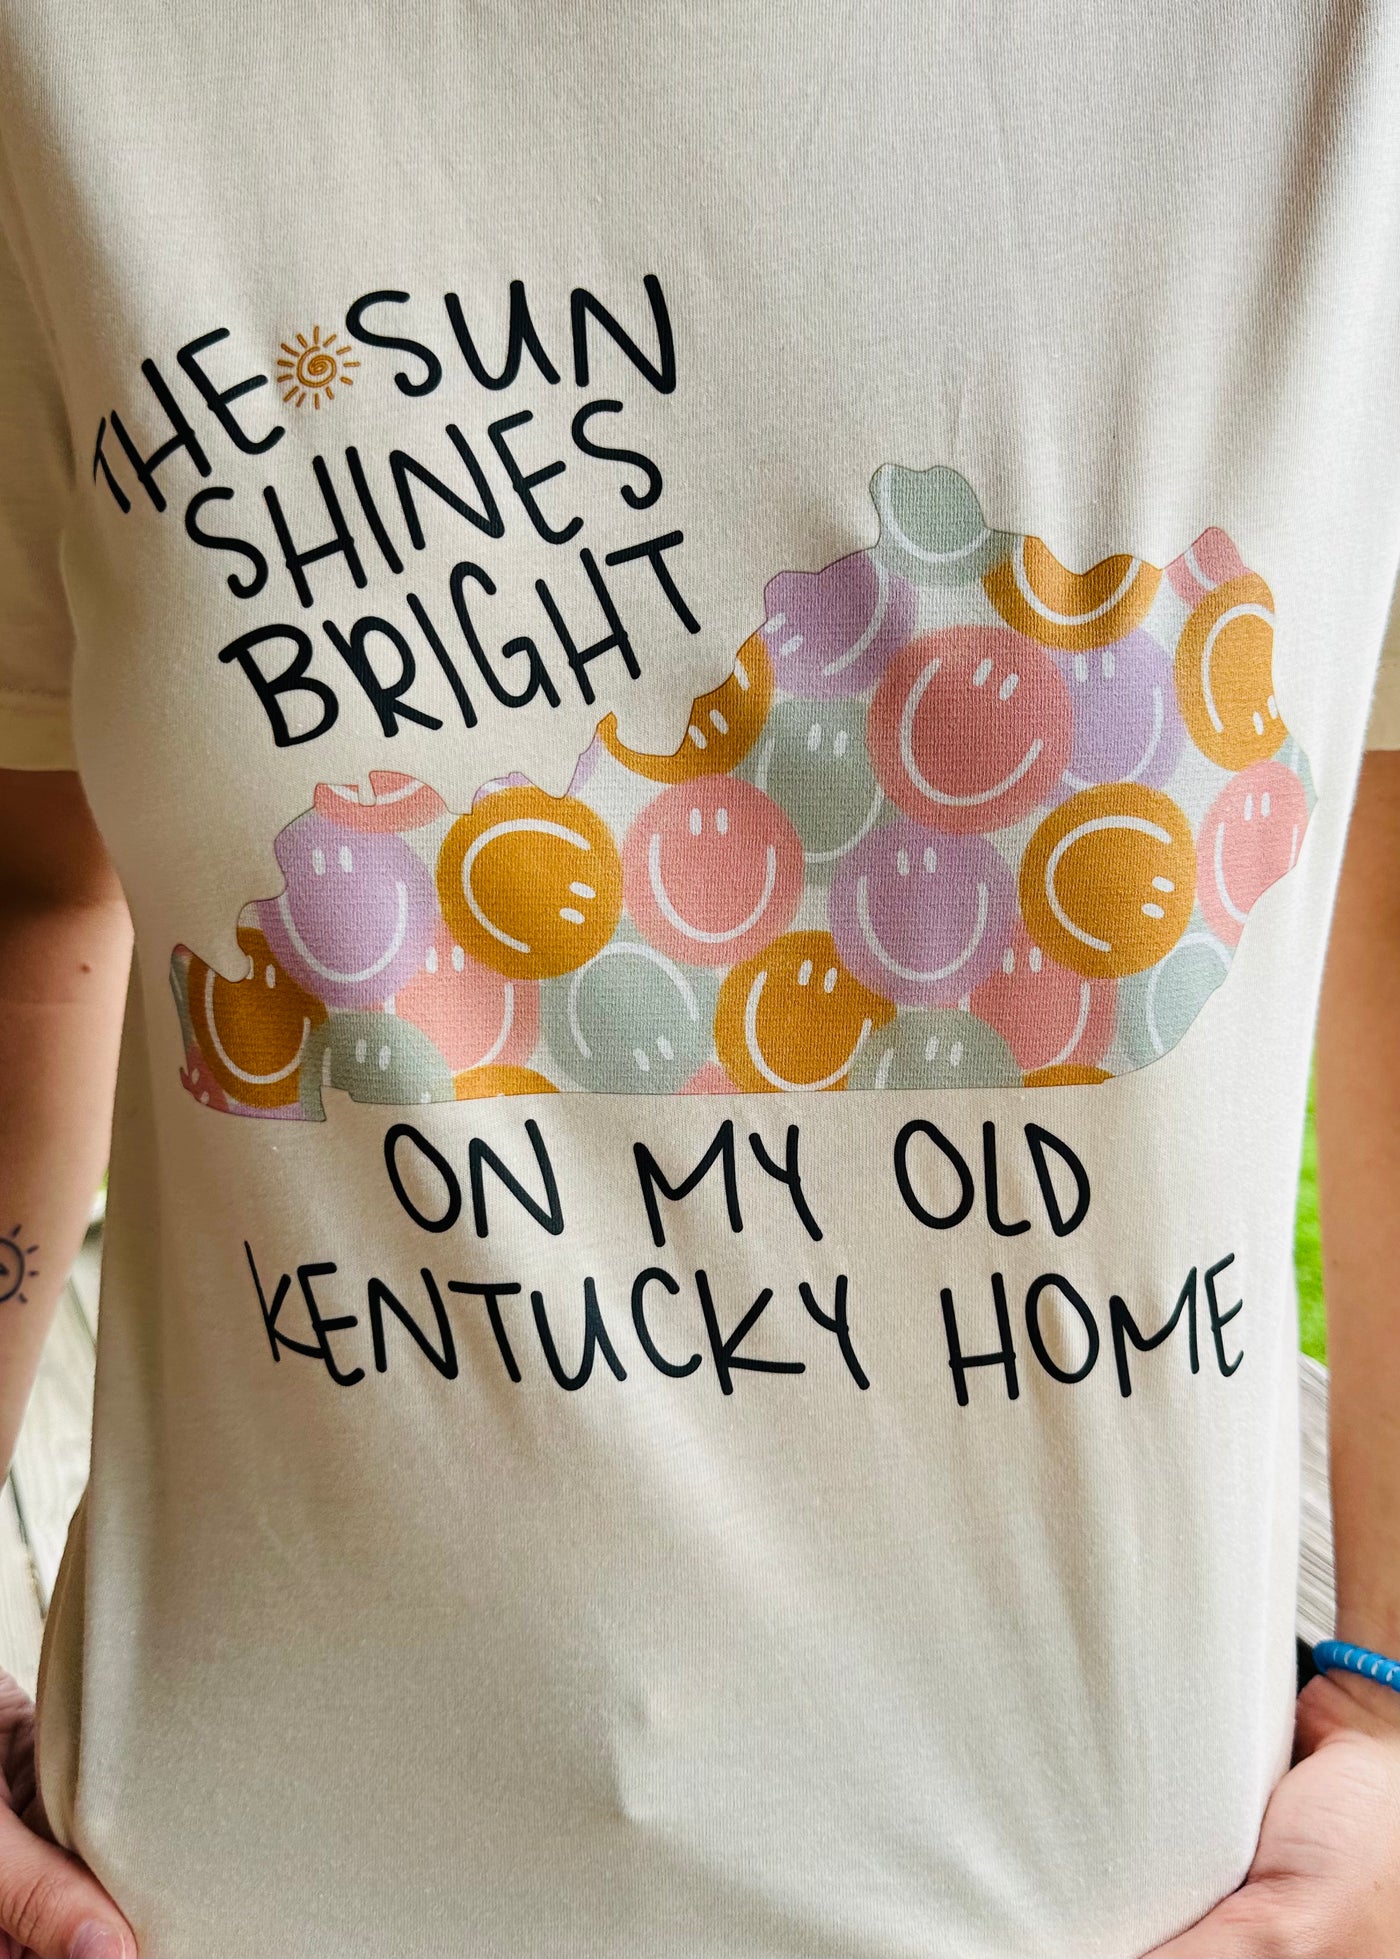 "The Sun Shines Bright on my Old Kentucky Home" Tee in Soft Cream